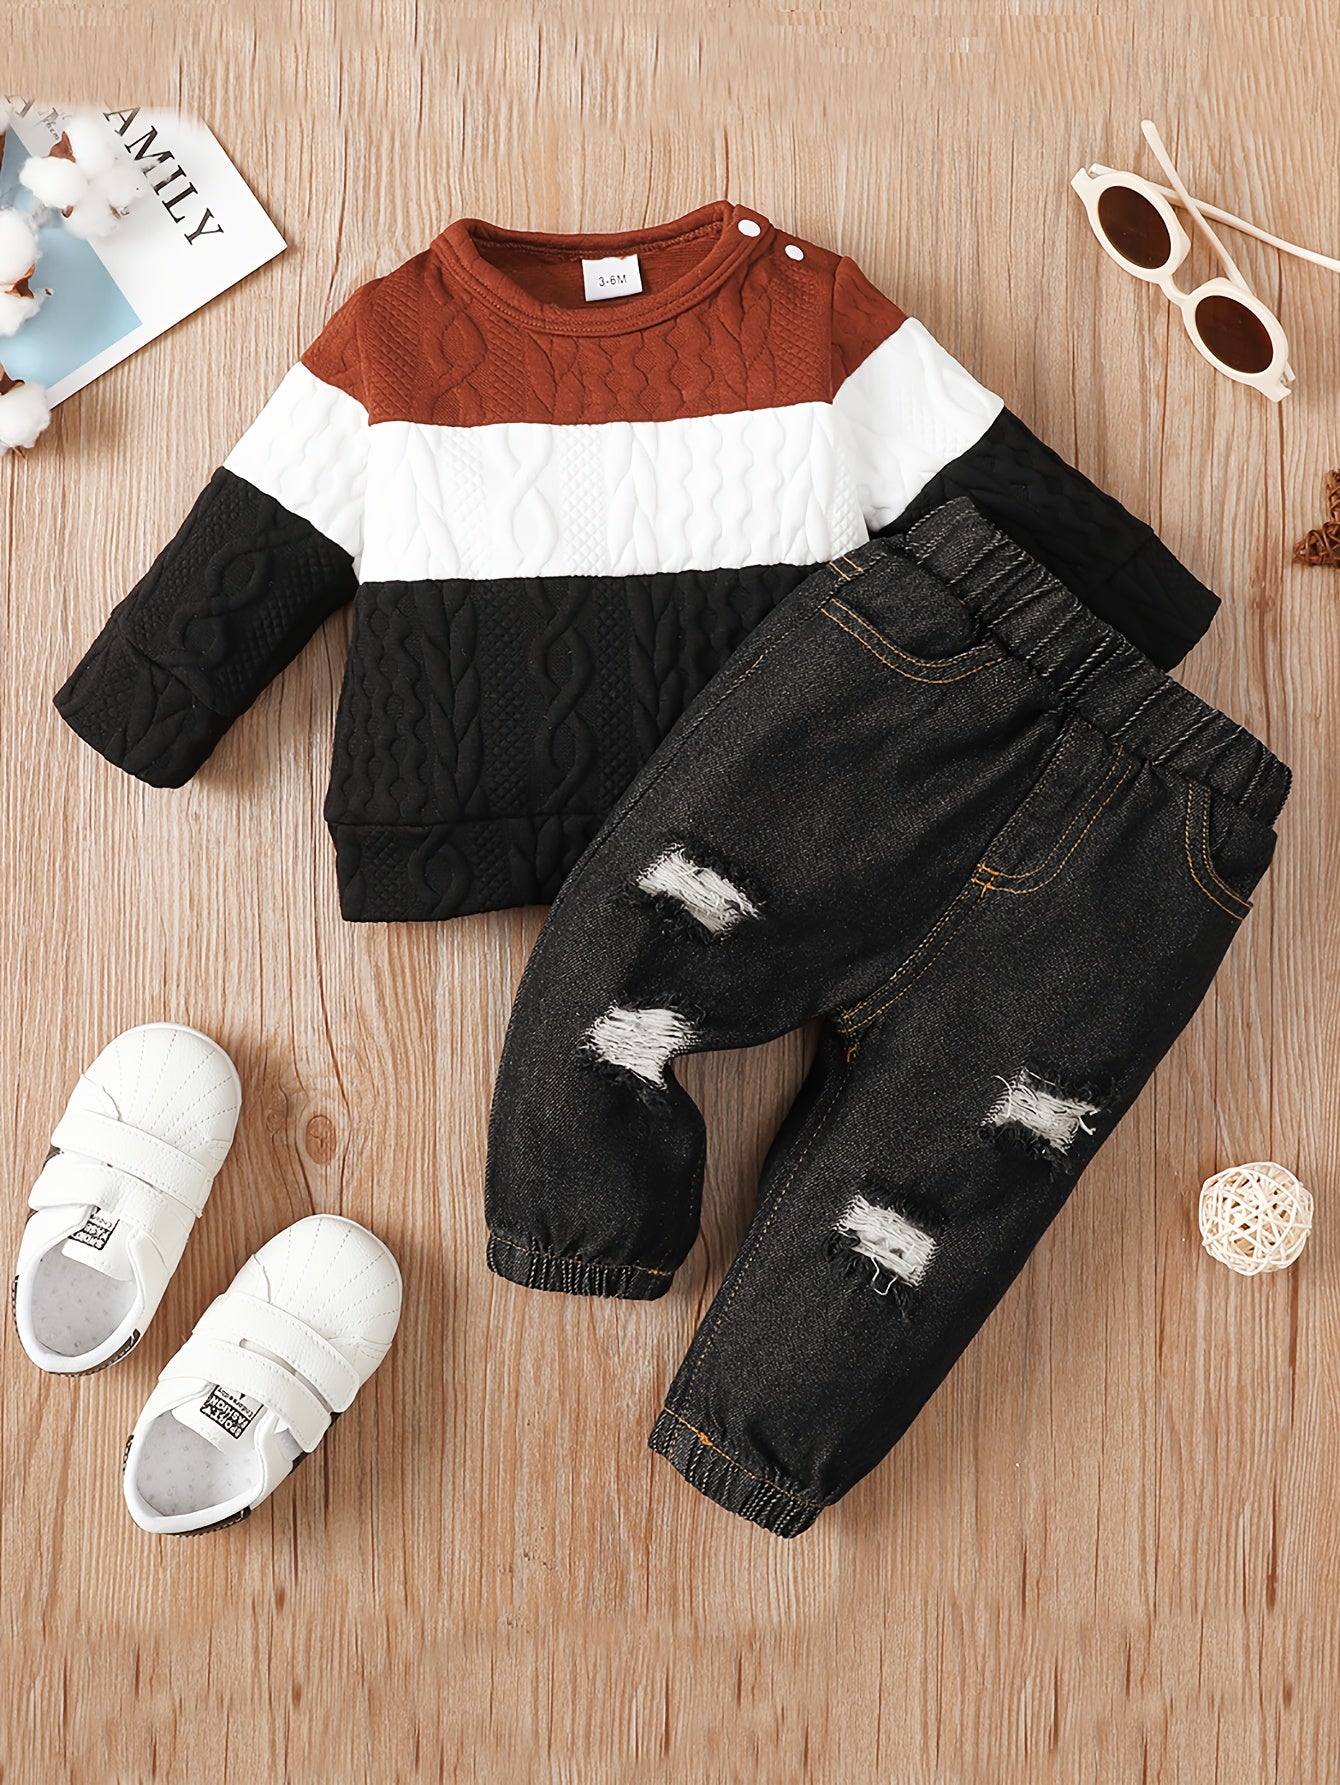 Baby Boys Casual Outfits - Kids Multicolor Stitching Long Sleeve Pullover Top + Ripped Jeans Set